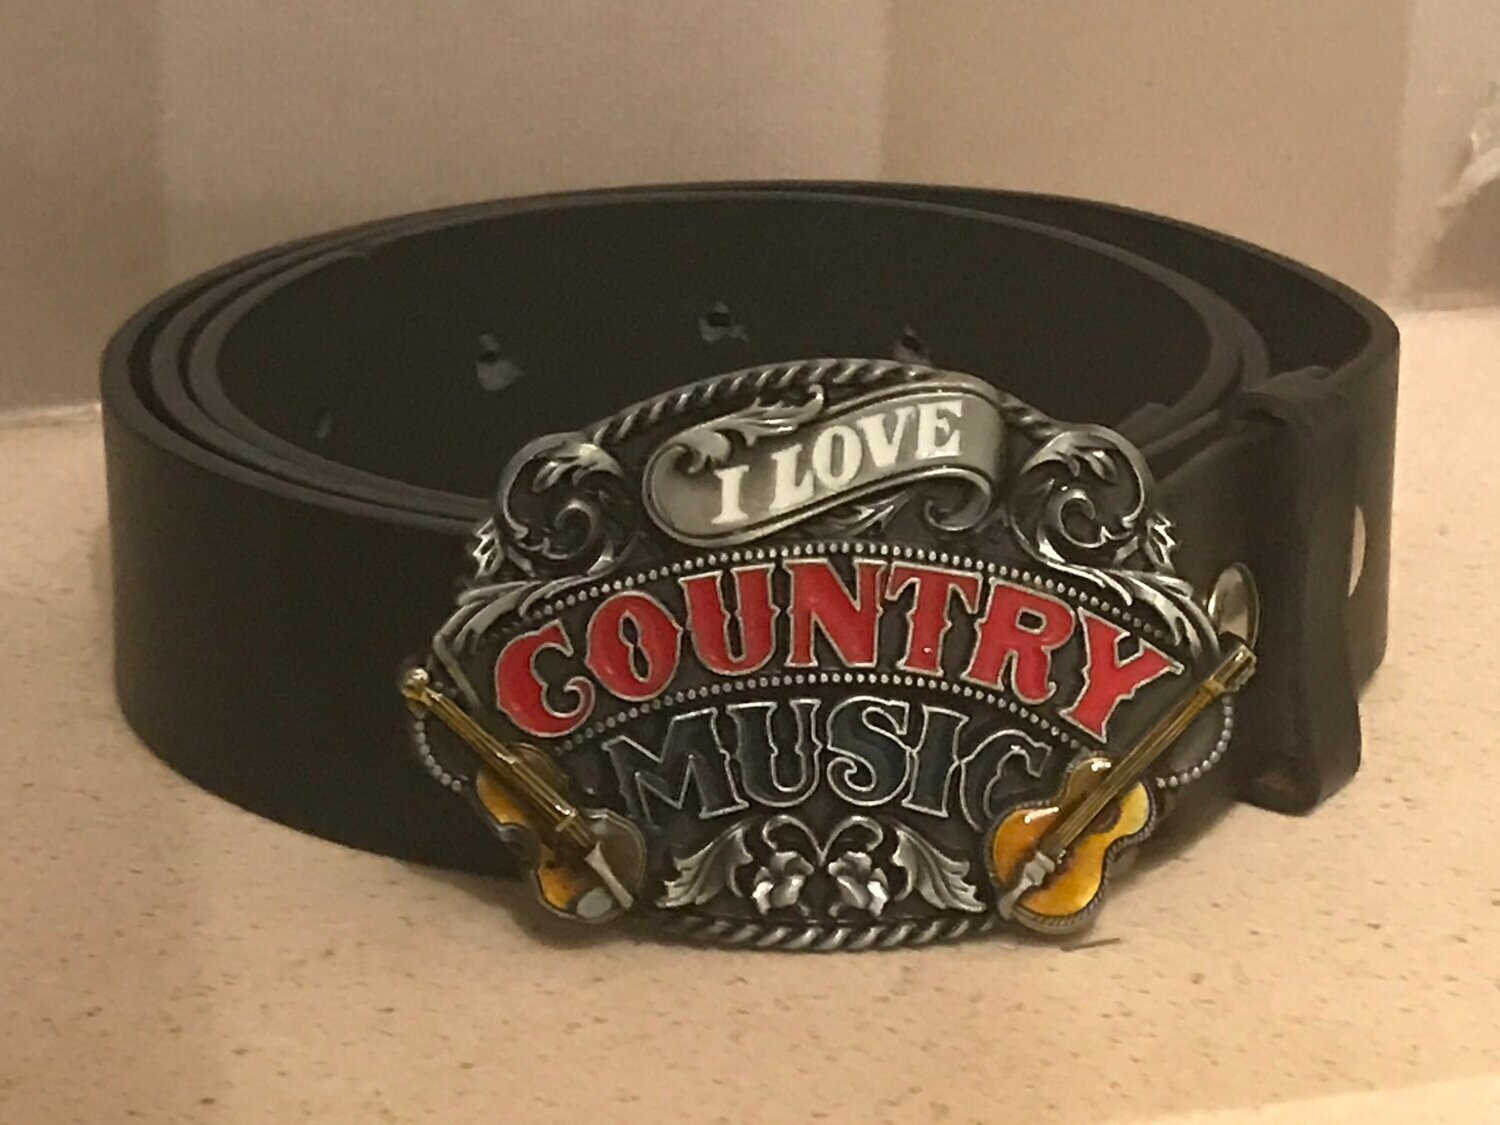 I LOVE COUNTRY MUSIC metal buckle with belt